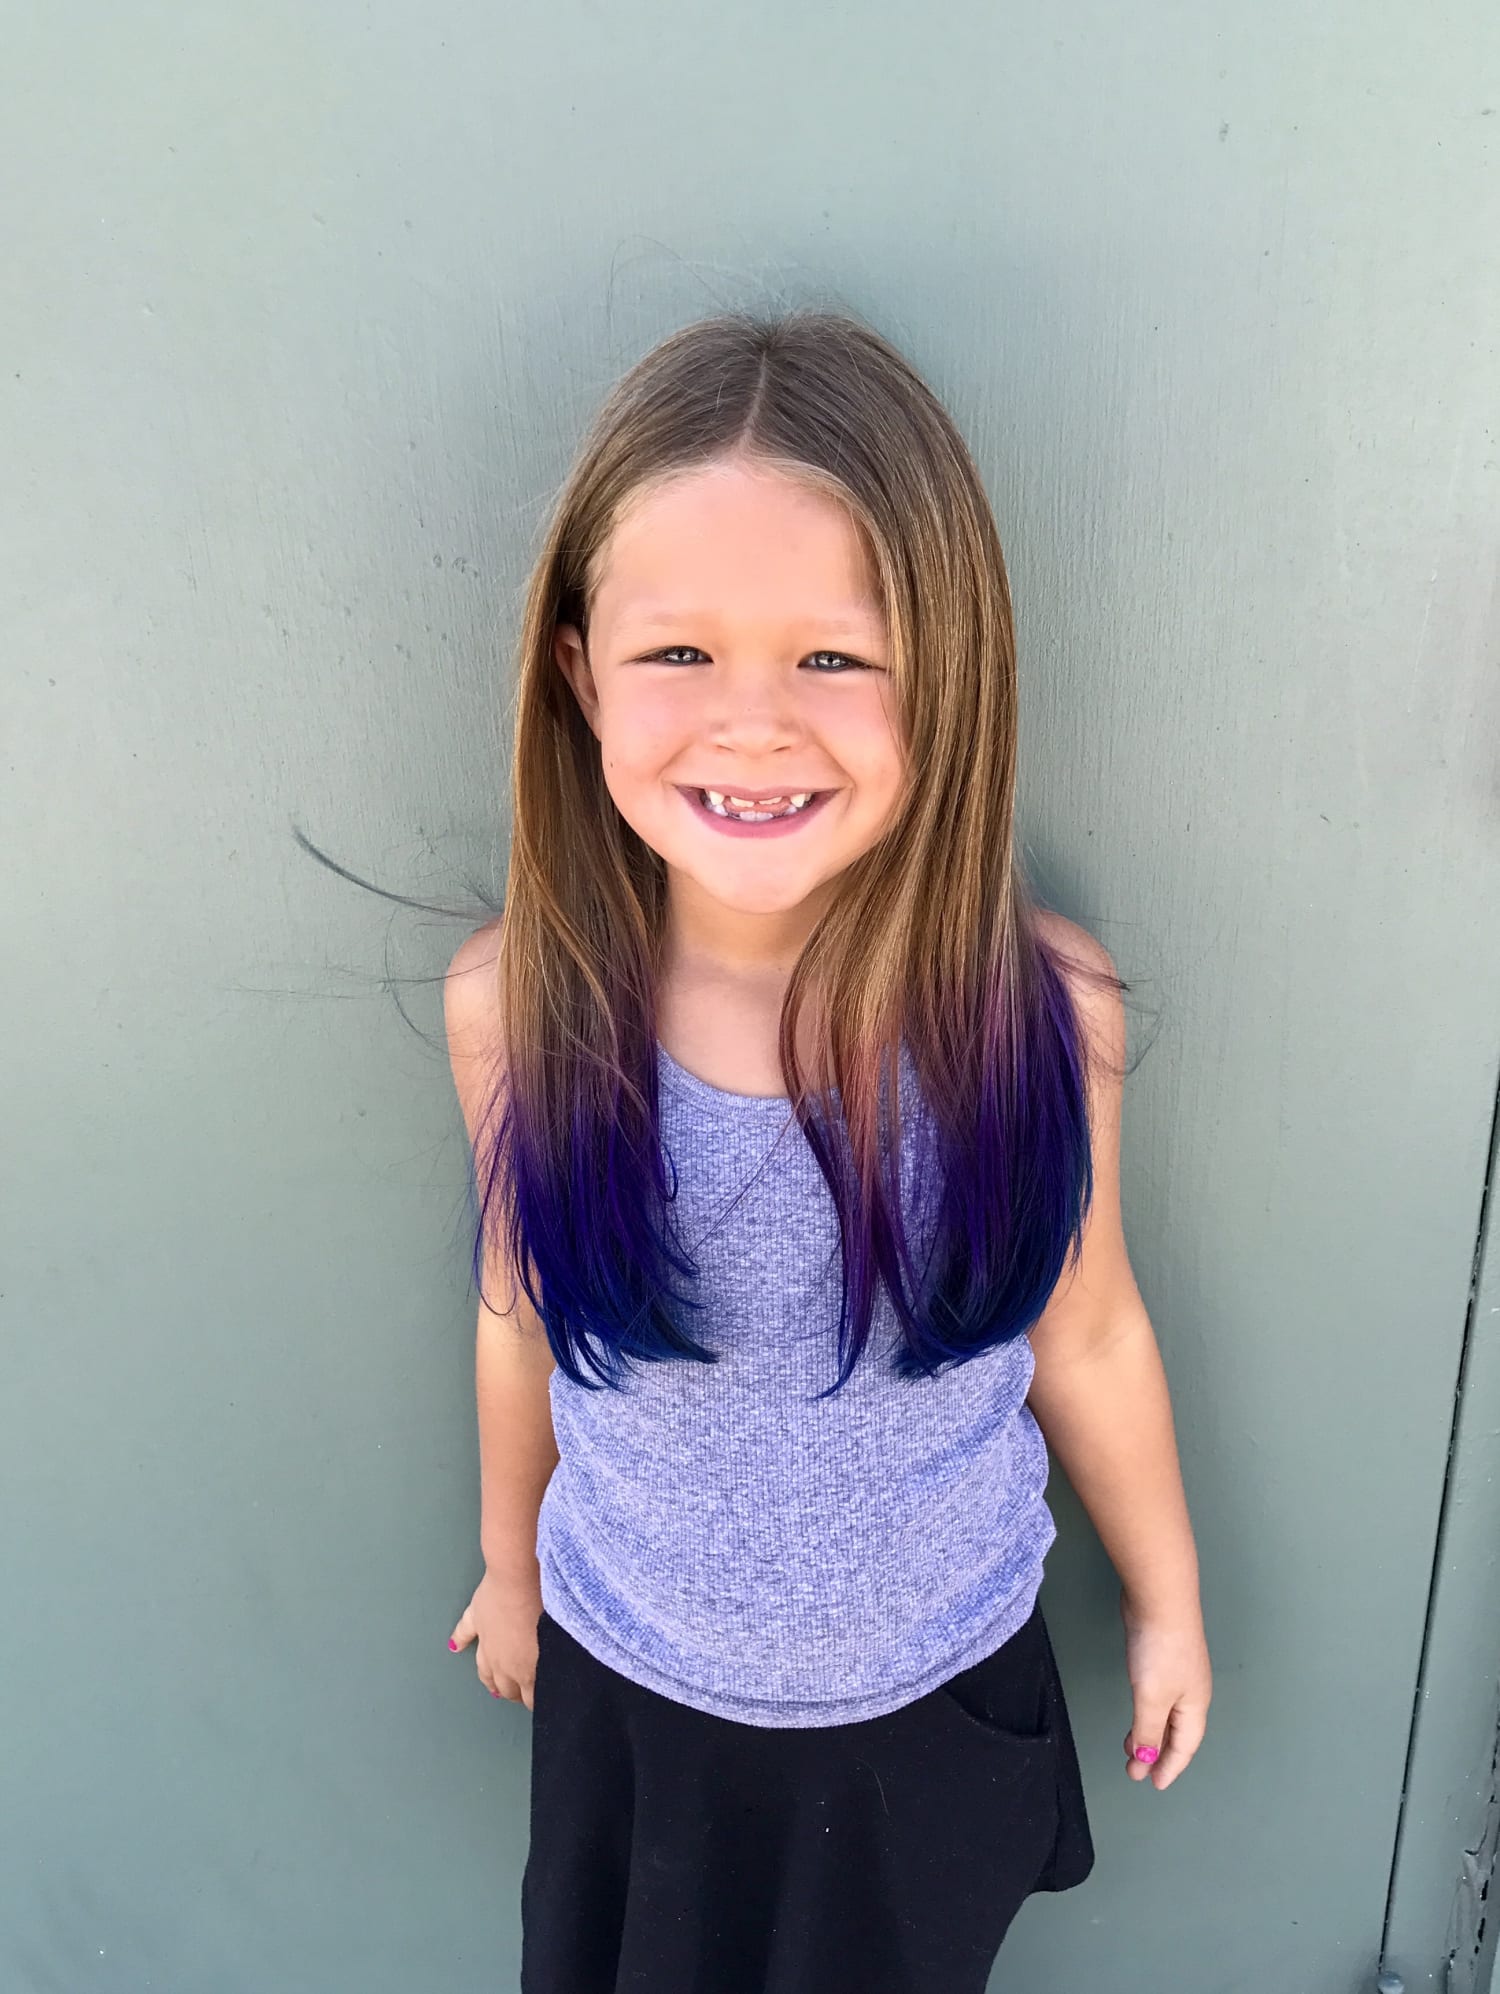 Is it safe for kids to dye their hair with wild colors?